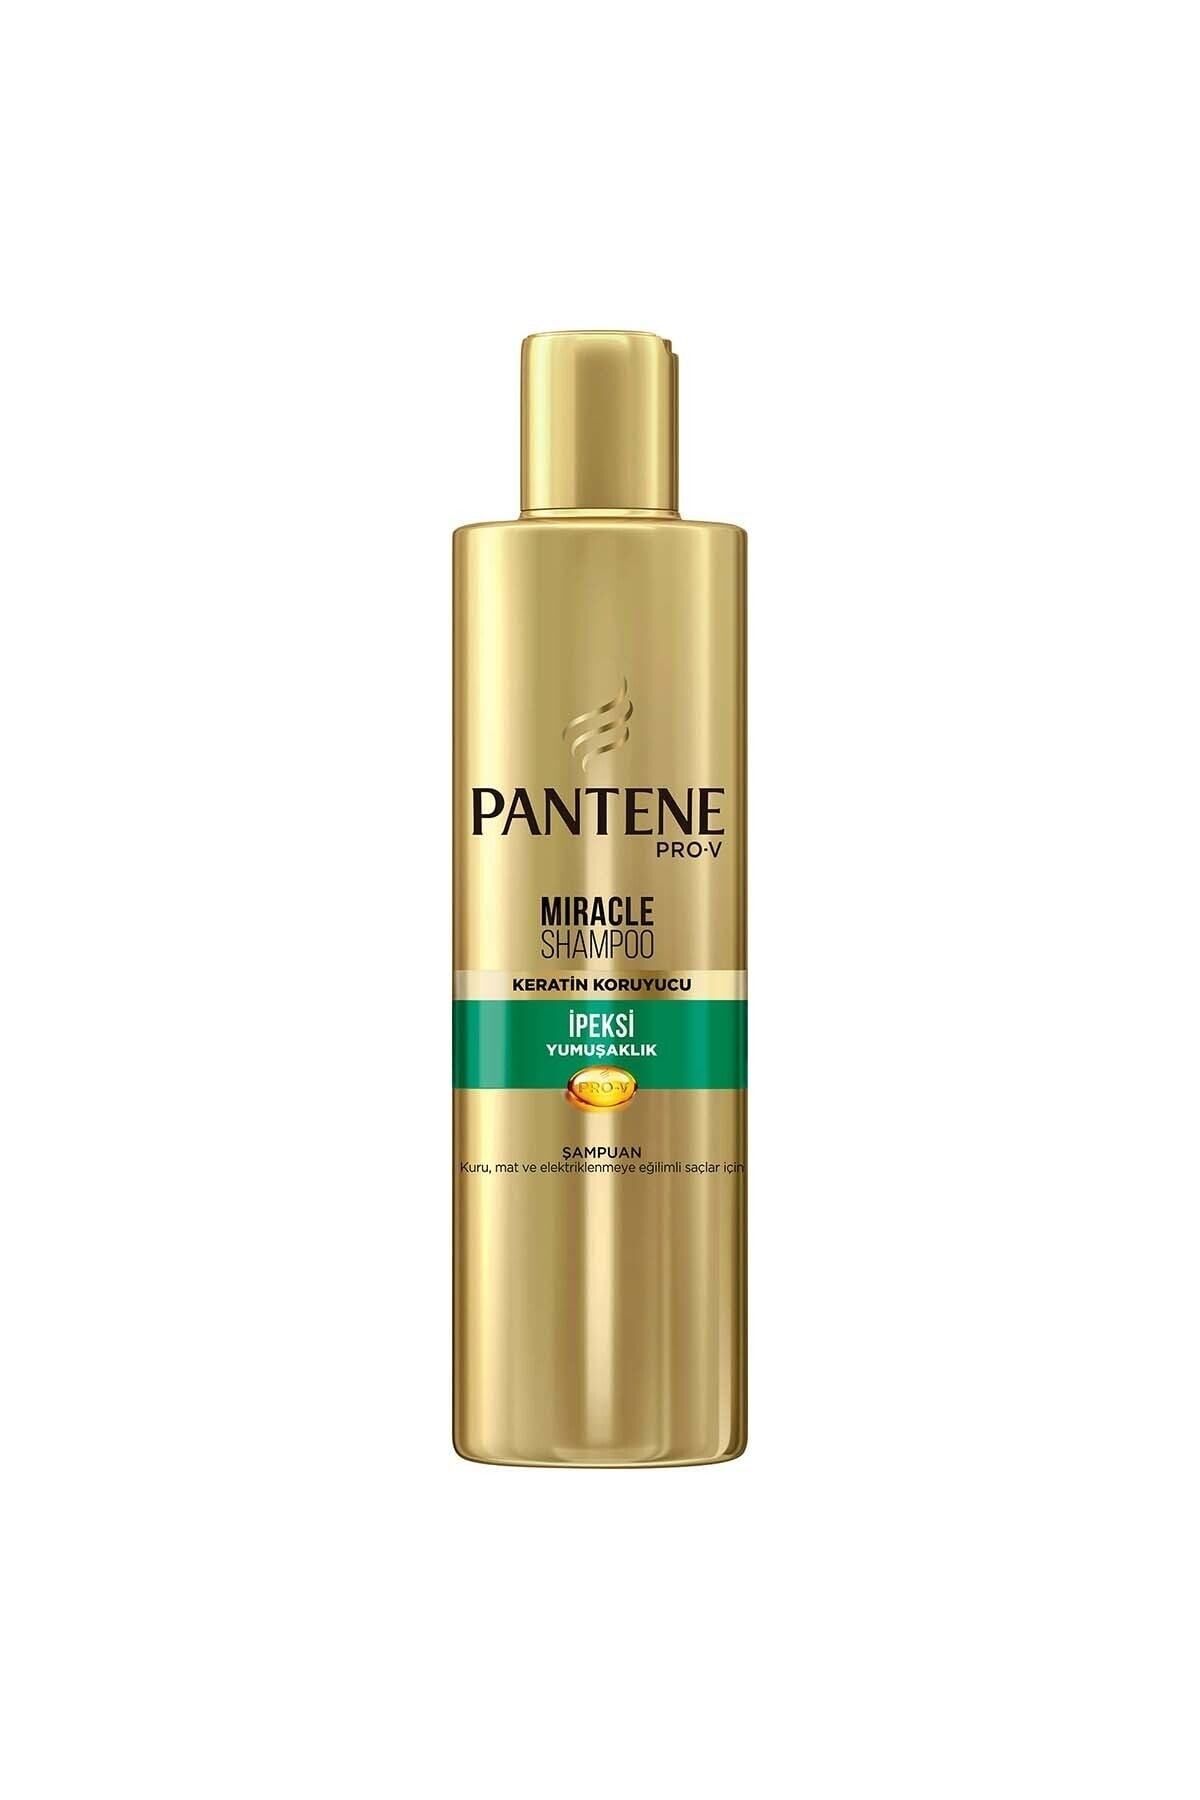 Pantene Miracle Shampoo Silky Softness with Keratin Protector 250ml Hair Prone to Frizz